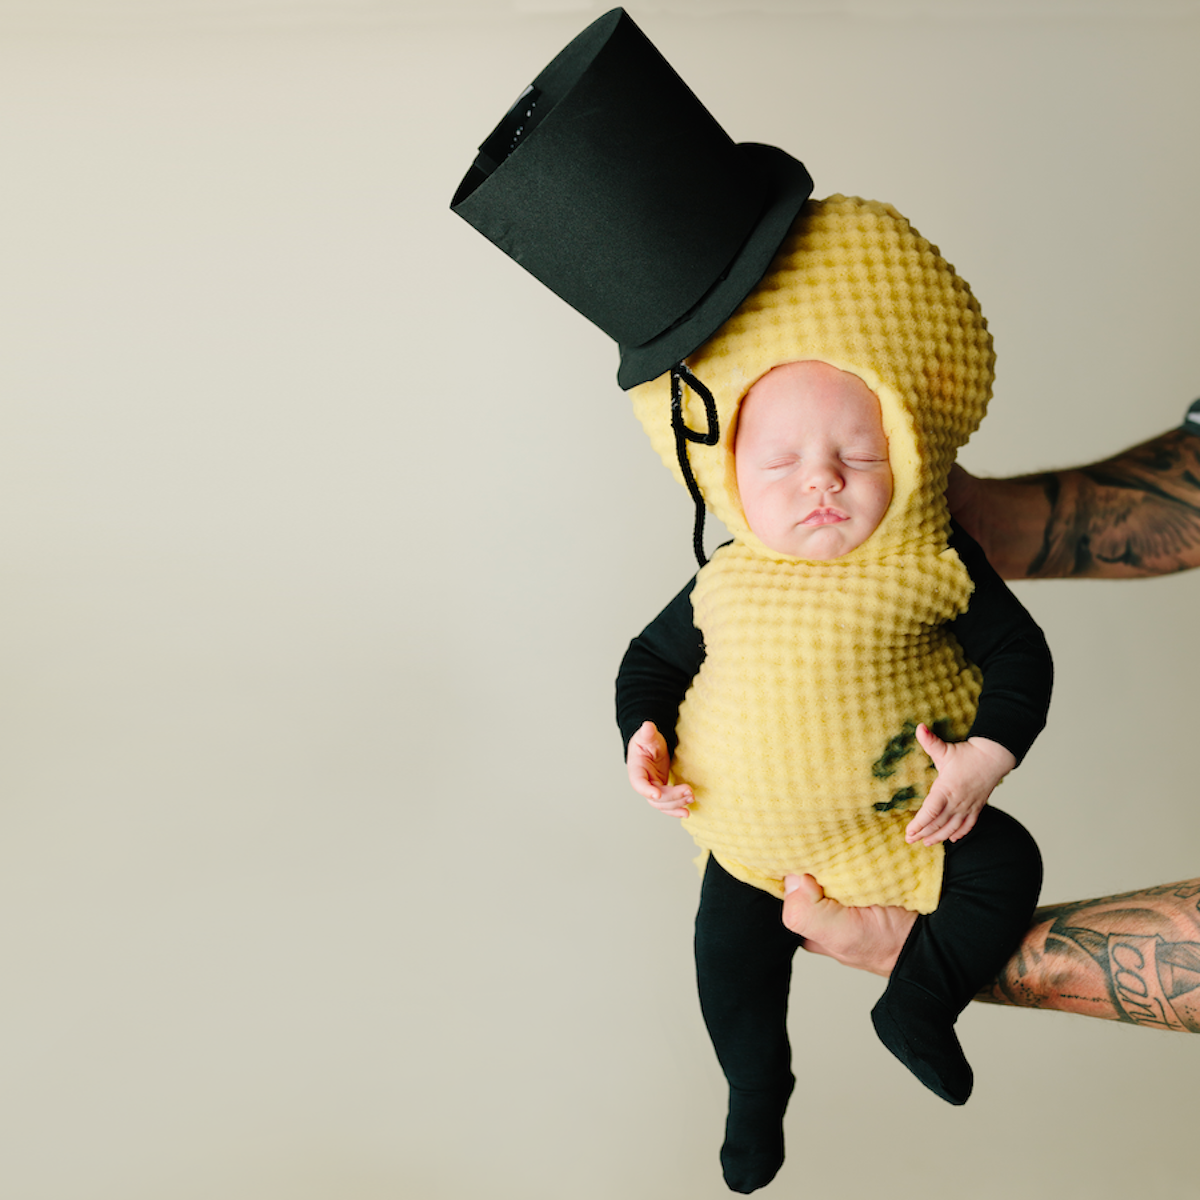 Mr. Peanut: A baby wearing a black babysuit with a yellow crocheted "peanut" costume overtop. 